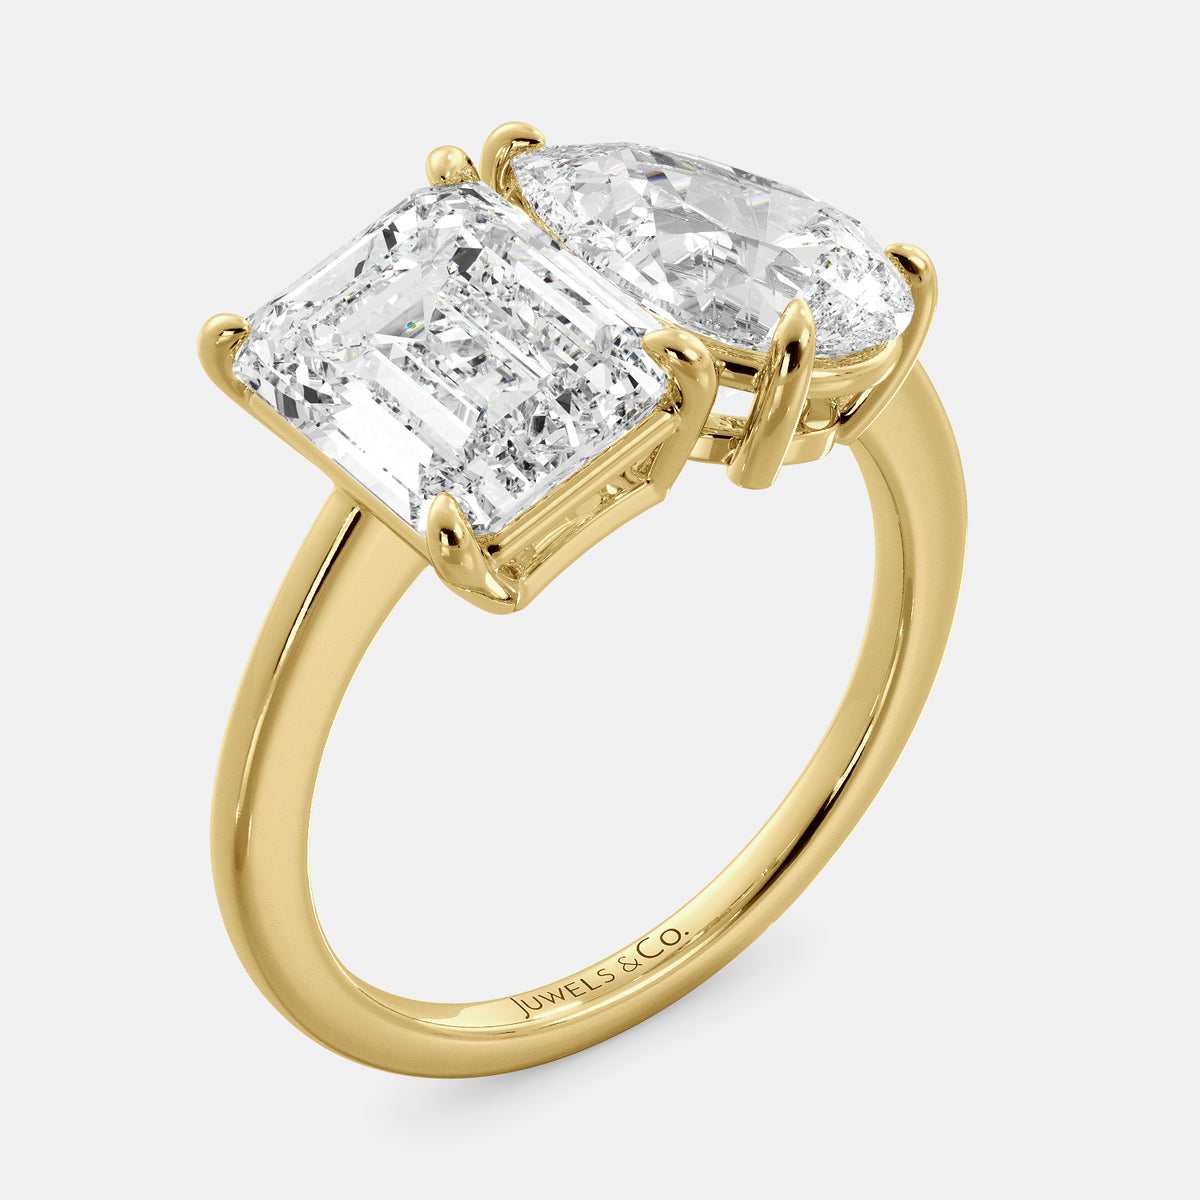 The Toi et Moi Diamond Ring: A Symbol of Love in Two Stones